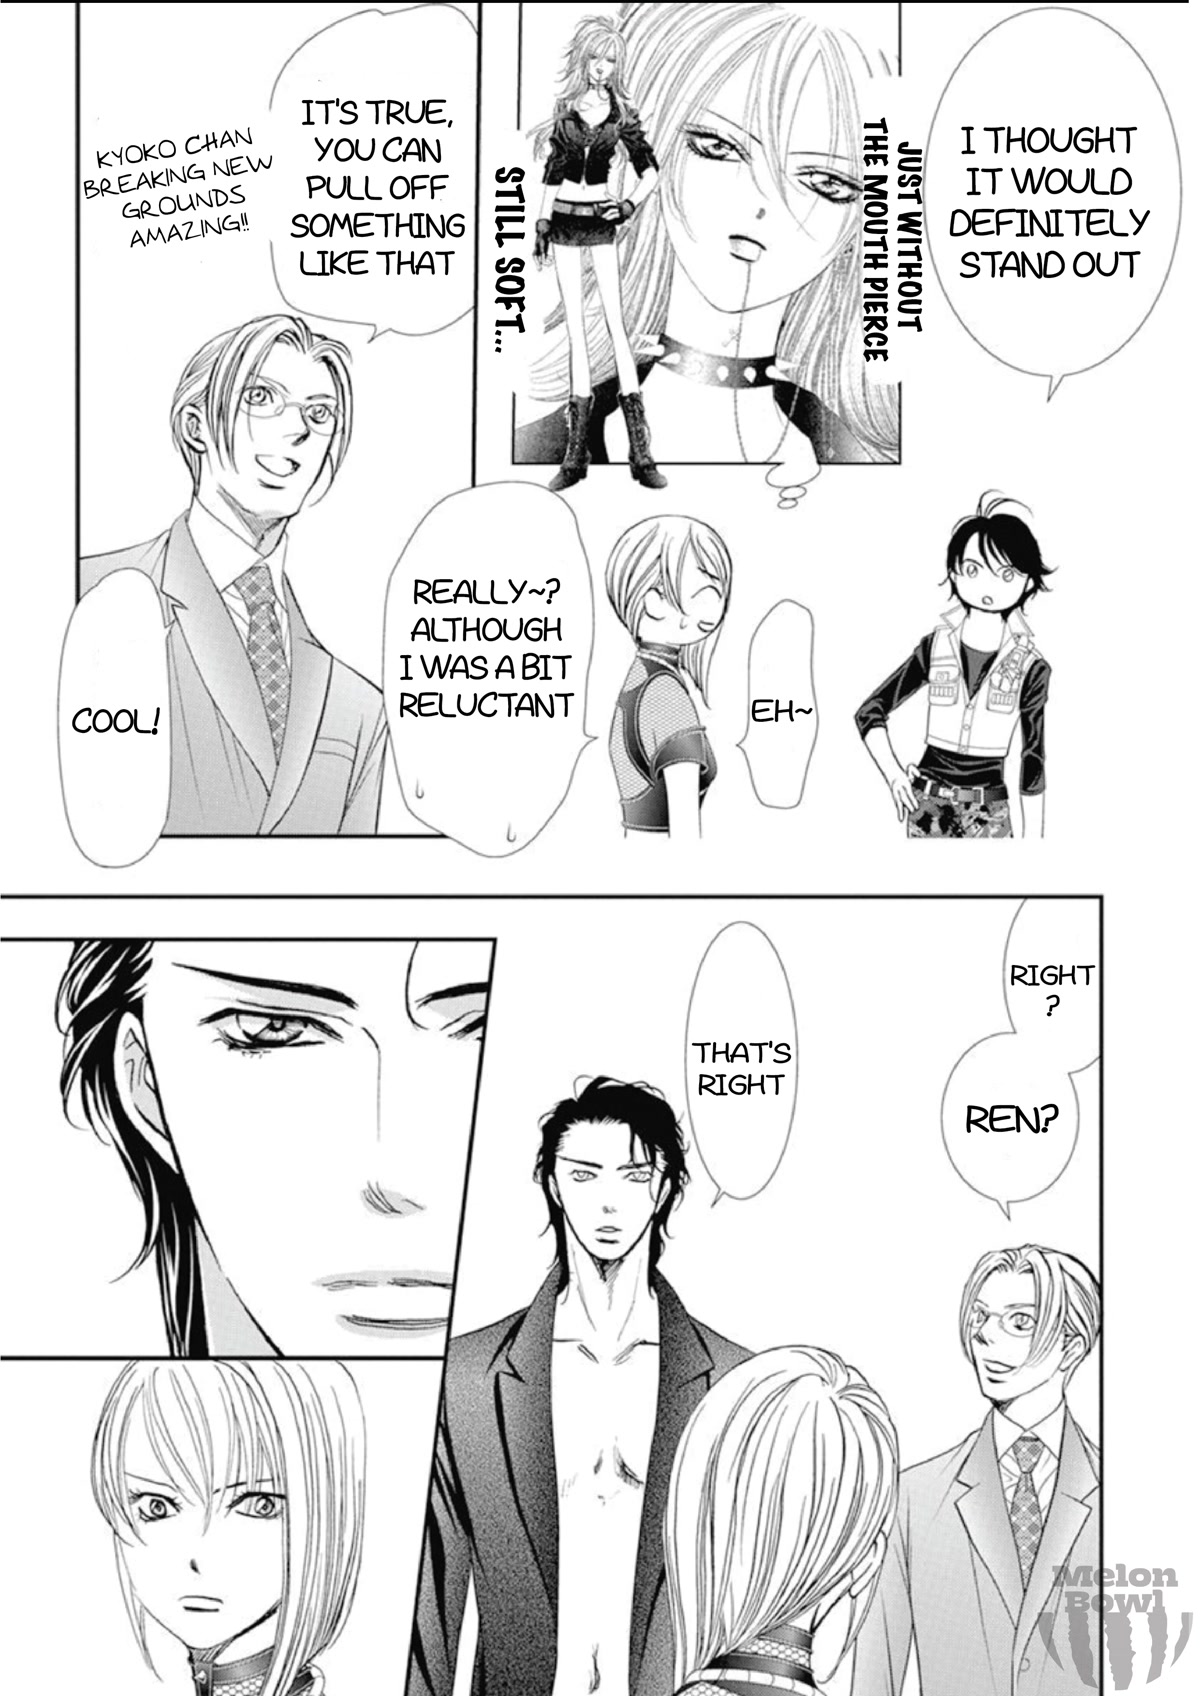 Skip Beat!, Chapter 308 Fairytale Dialogue image 04